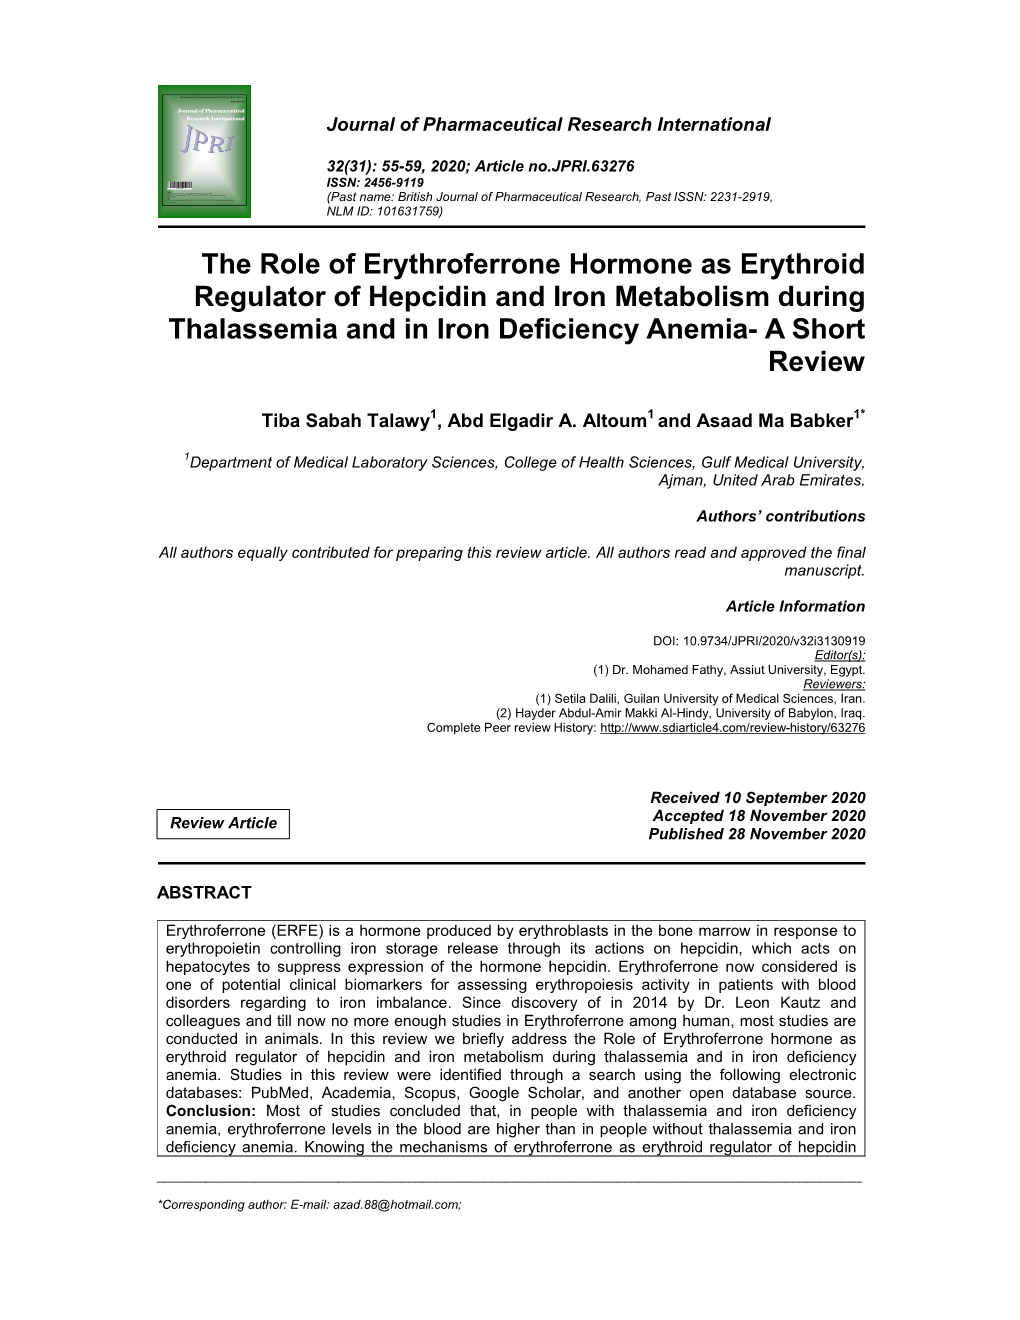 The Role of Erythroferrone Hormone As Erythroid Regulator of Hepcidin and Iron Metabolism During Thalassemia and in Iron Deficiency Anemia- a Short Review